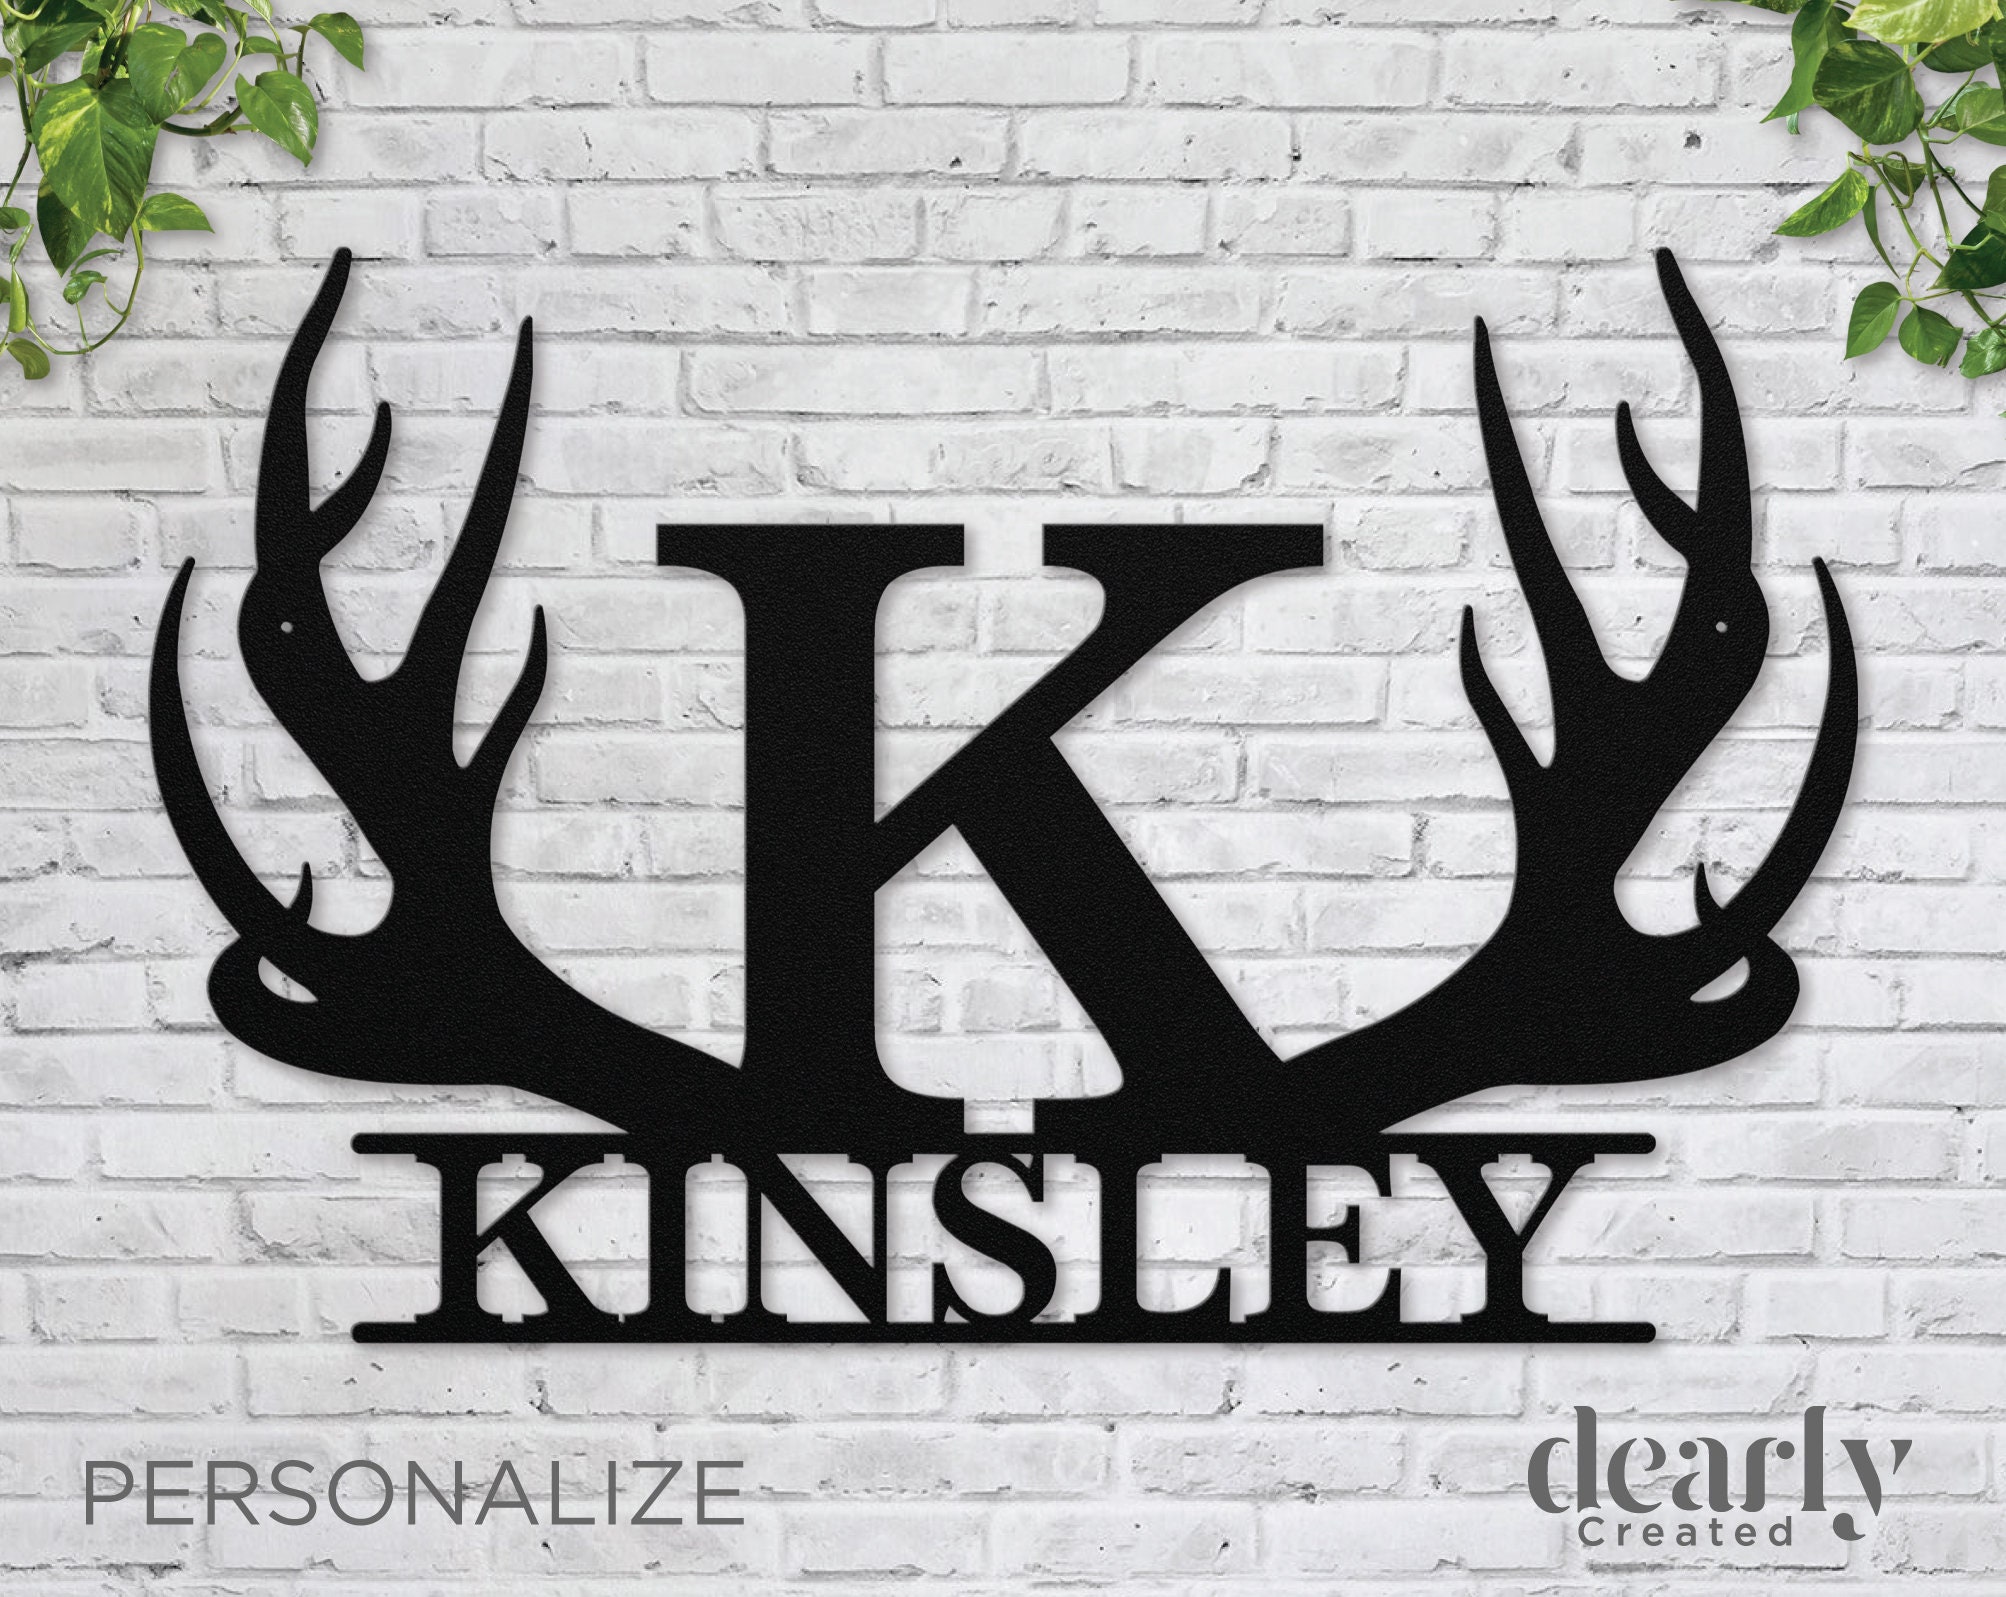 Personalized Mr. and Mrs. Tumbler Decals with Antlers Vinyl